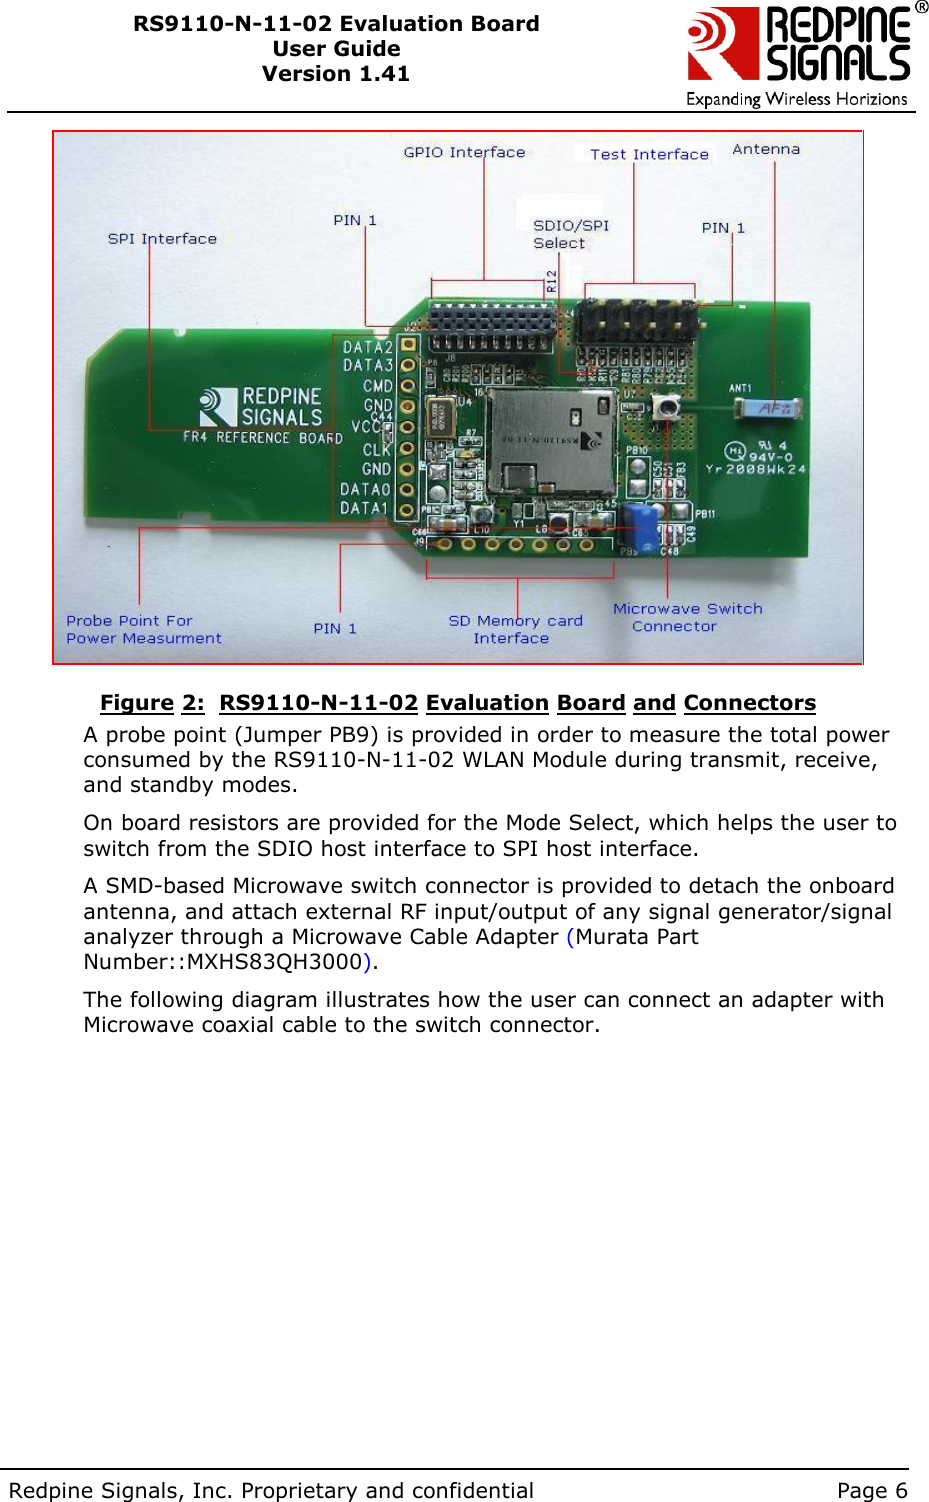        Redpine Signals, Inc. Proprietary and confidential    Page 6 RS9110-N-11-02 Evaluation Board User Guide Version 1.41    Figure 2:  RS9110-N-11-02 Evaluation Board and Connectors A probe point (Jumper PB9) is provided in order to measure the total power consumed by the RS9110-N-11-02 WLAN Module during transmit, receive, and standby modes. On board resistors are provided for the Mode Select, which helps the user to switch from the SDIO host interface to SPI host interface. A SMD-based Microwave switch connector is provided to detach the onboard antenna, and attach external RF input/output of any signal generator/signal analyzer through a Microwave Cable Adapter (Murata Part Number::MXHS83QH3000).  The following diagram illustrates how the user can connect an adapter with Microwave coaxial cable to the switch connector.   